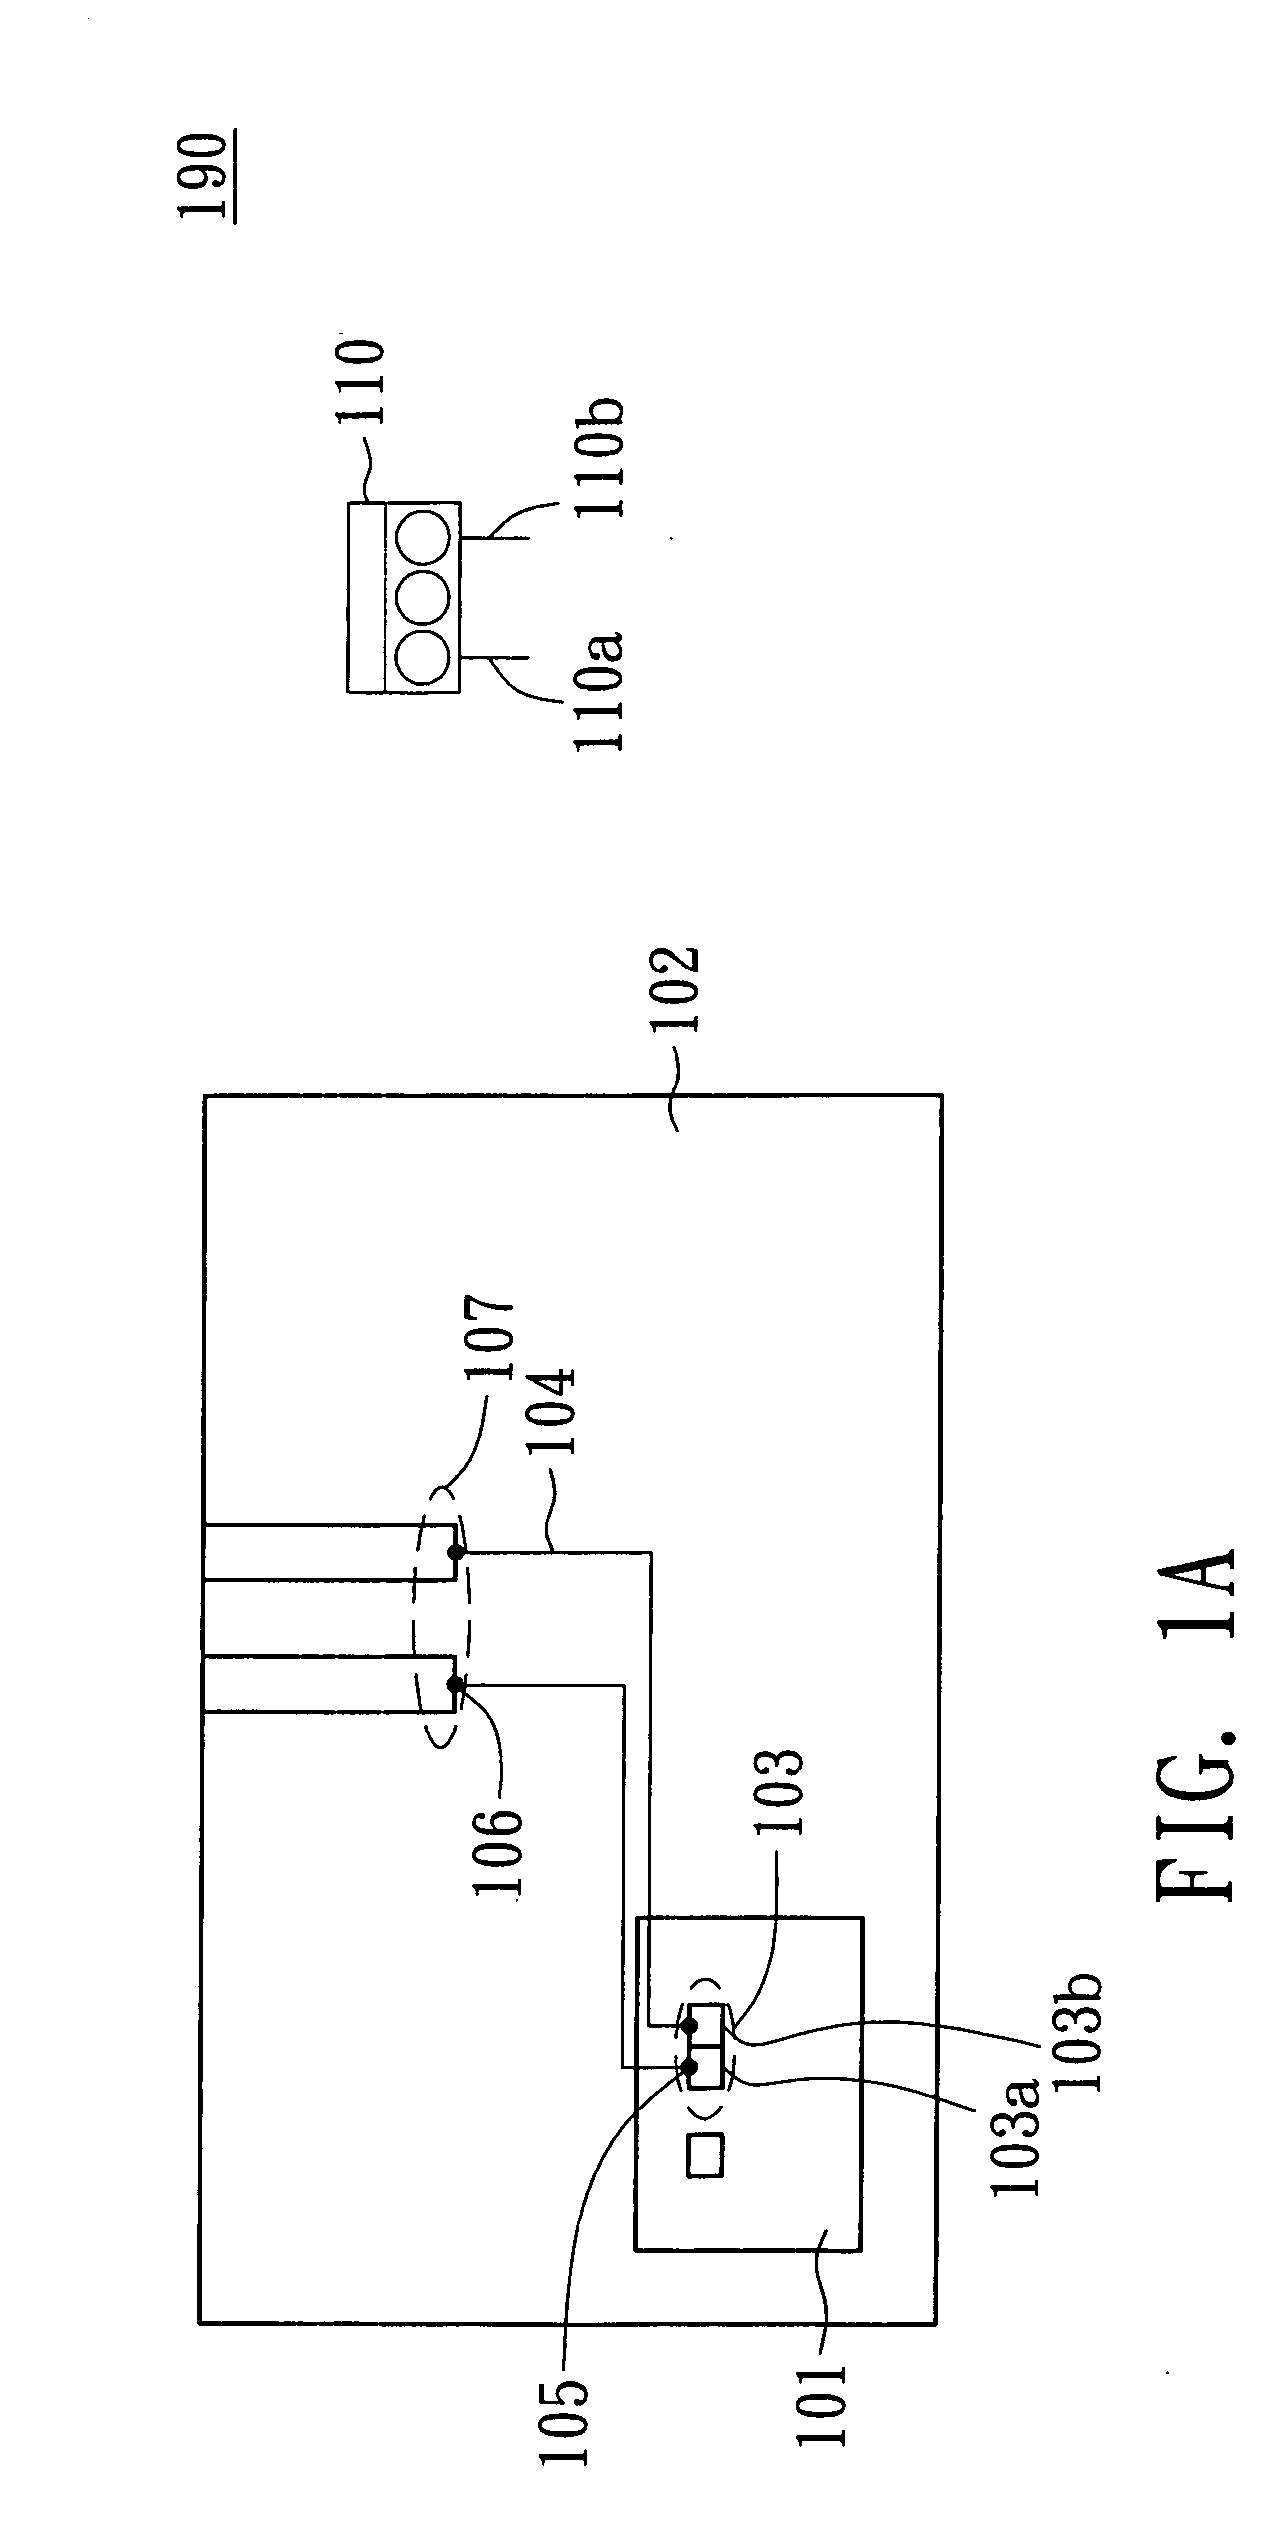 Bonding configuration structure for facilitating electrical testing in a bonding process and a testing method using the same